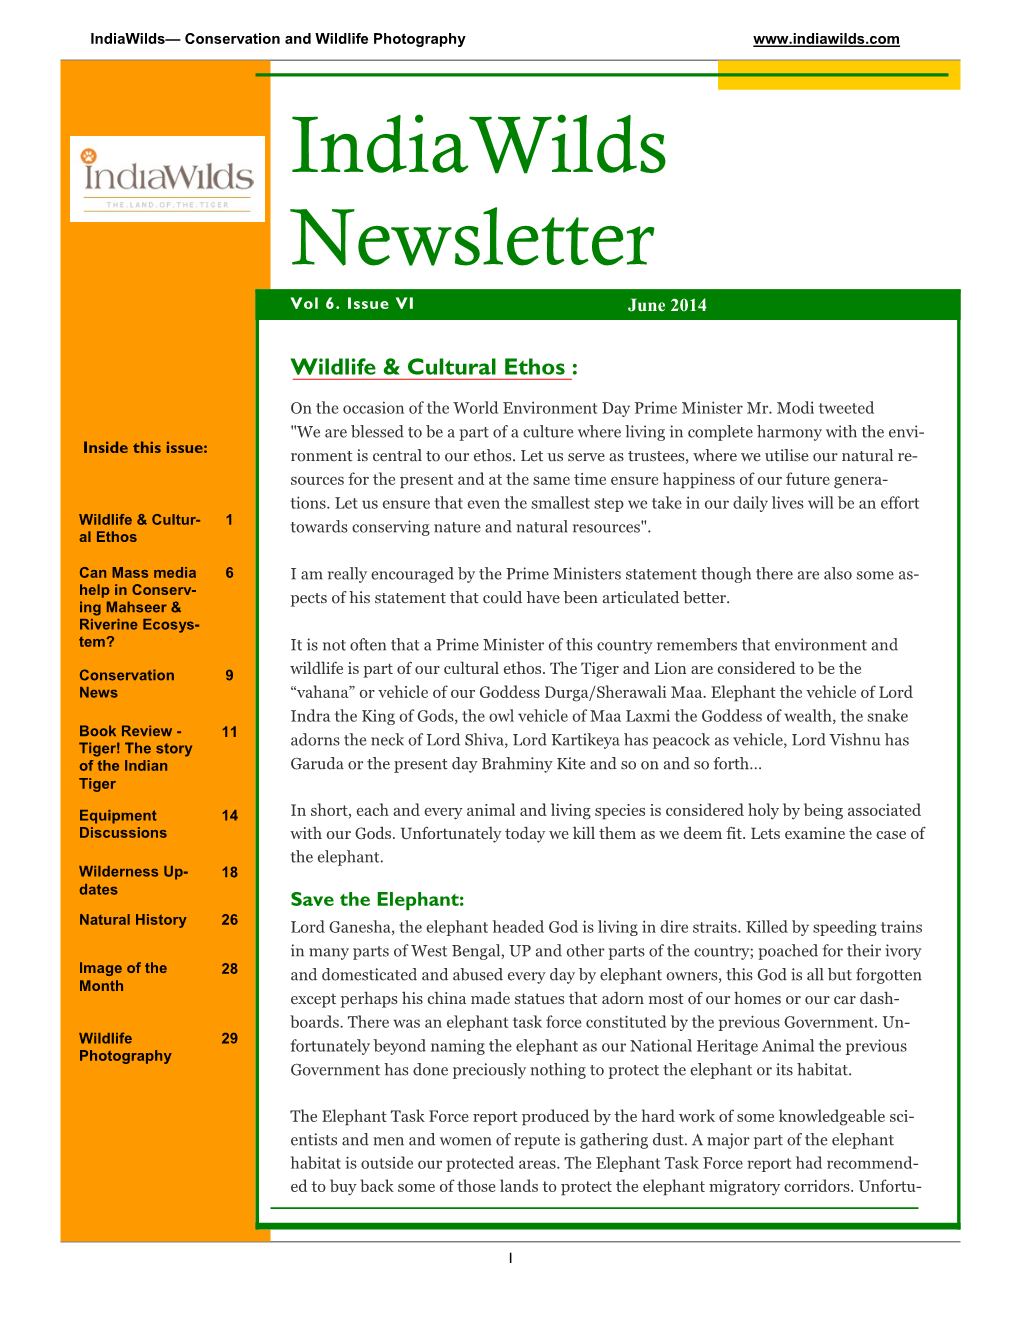 Indiawilds Newsletter Vol 6